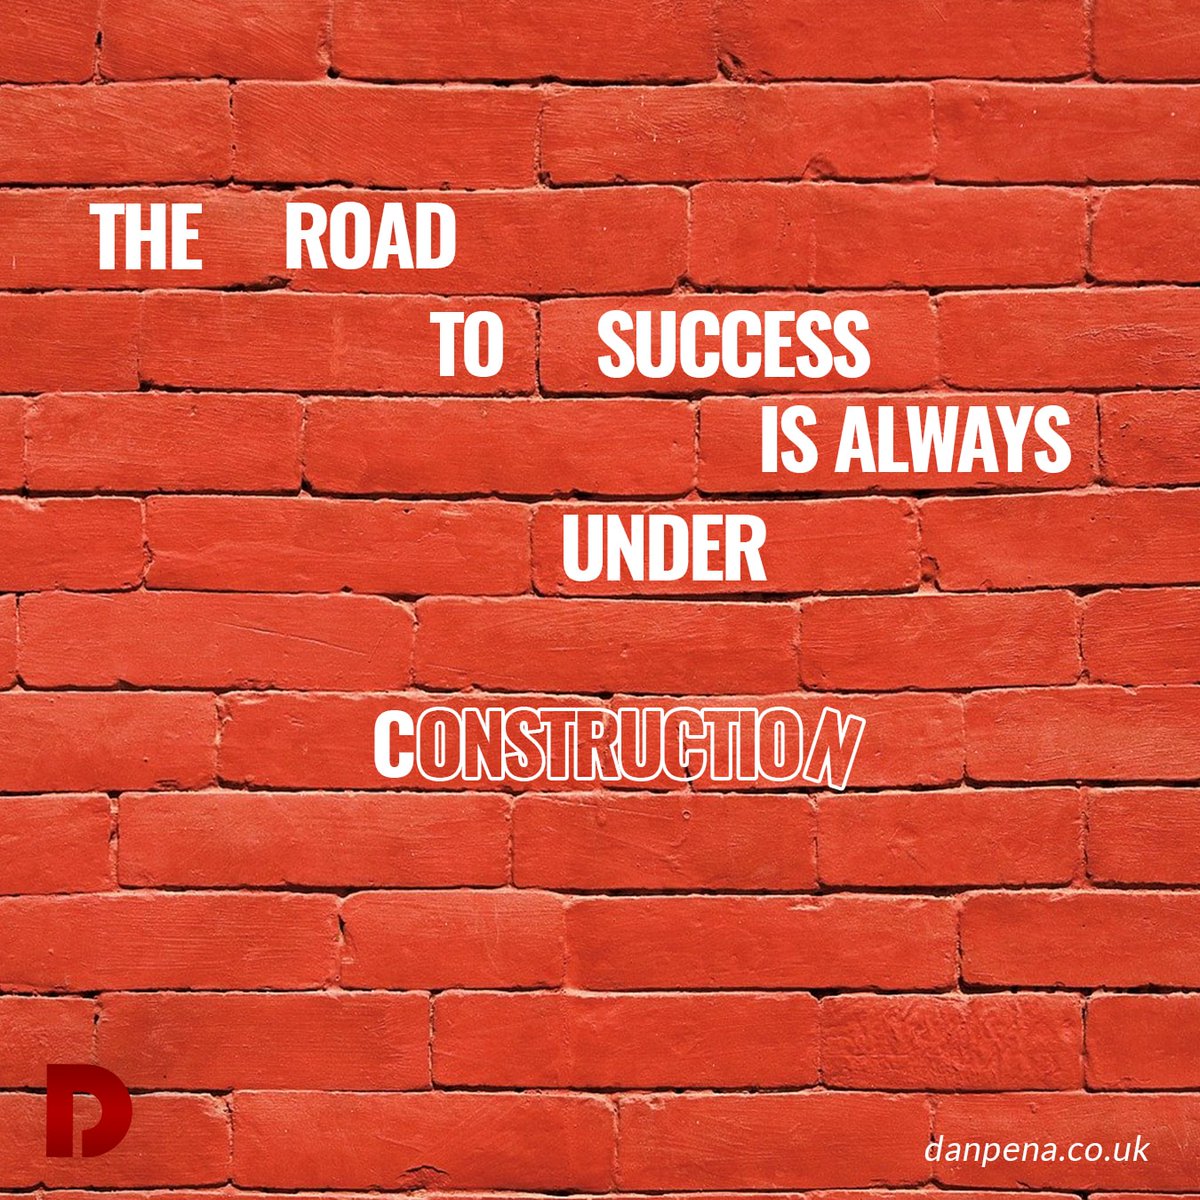 It may sounce like a cliche, but it's the truth! The road to success is always under construction!

#danpena #penaism #roadtosuccess #success